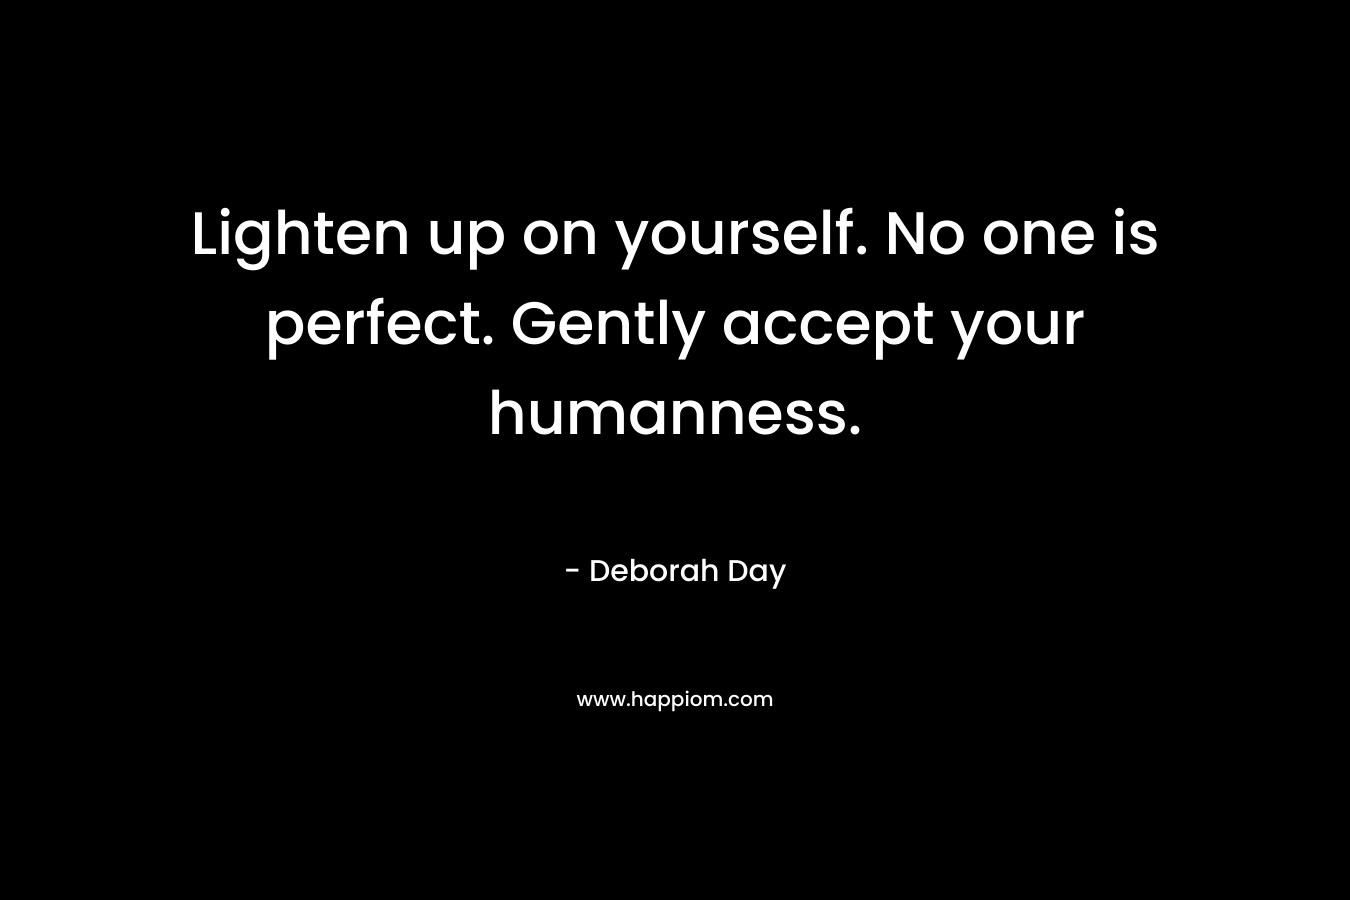 Lighten up on yourself. No one is perfect. Gently accept your humanness. – Deborah Day